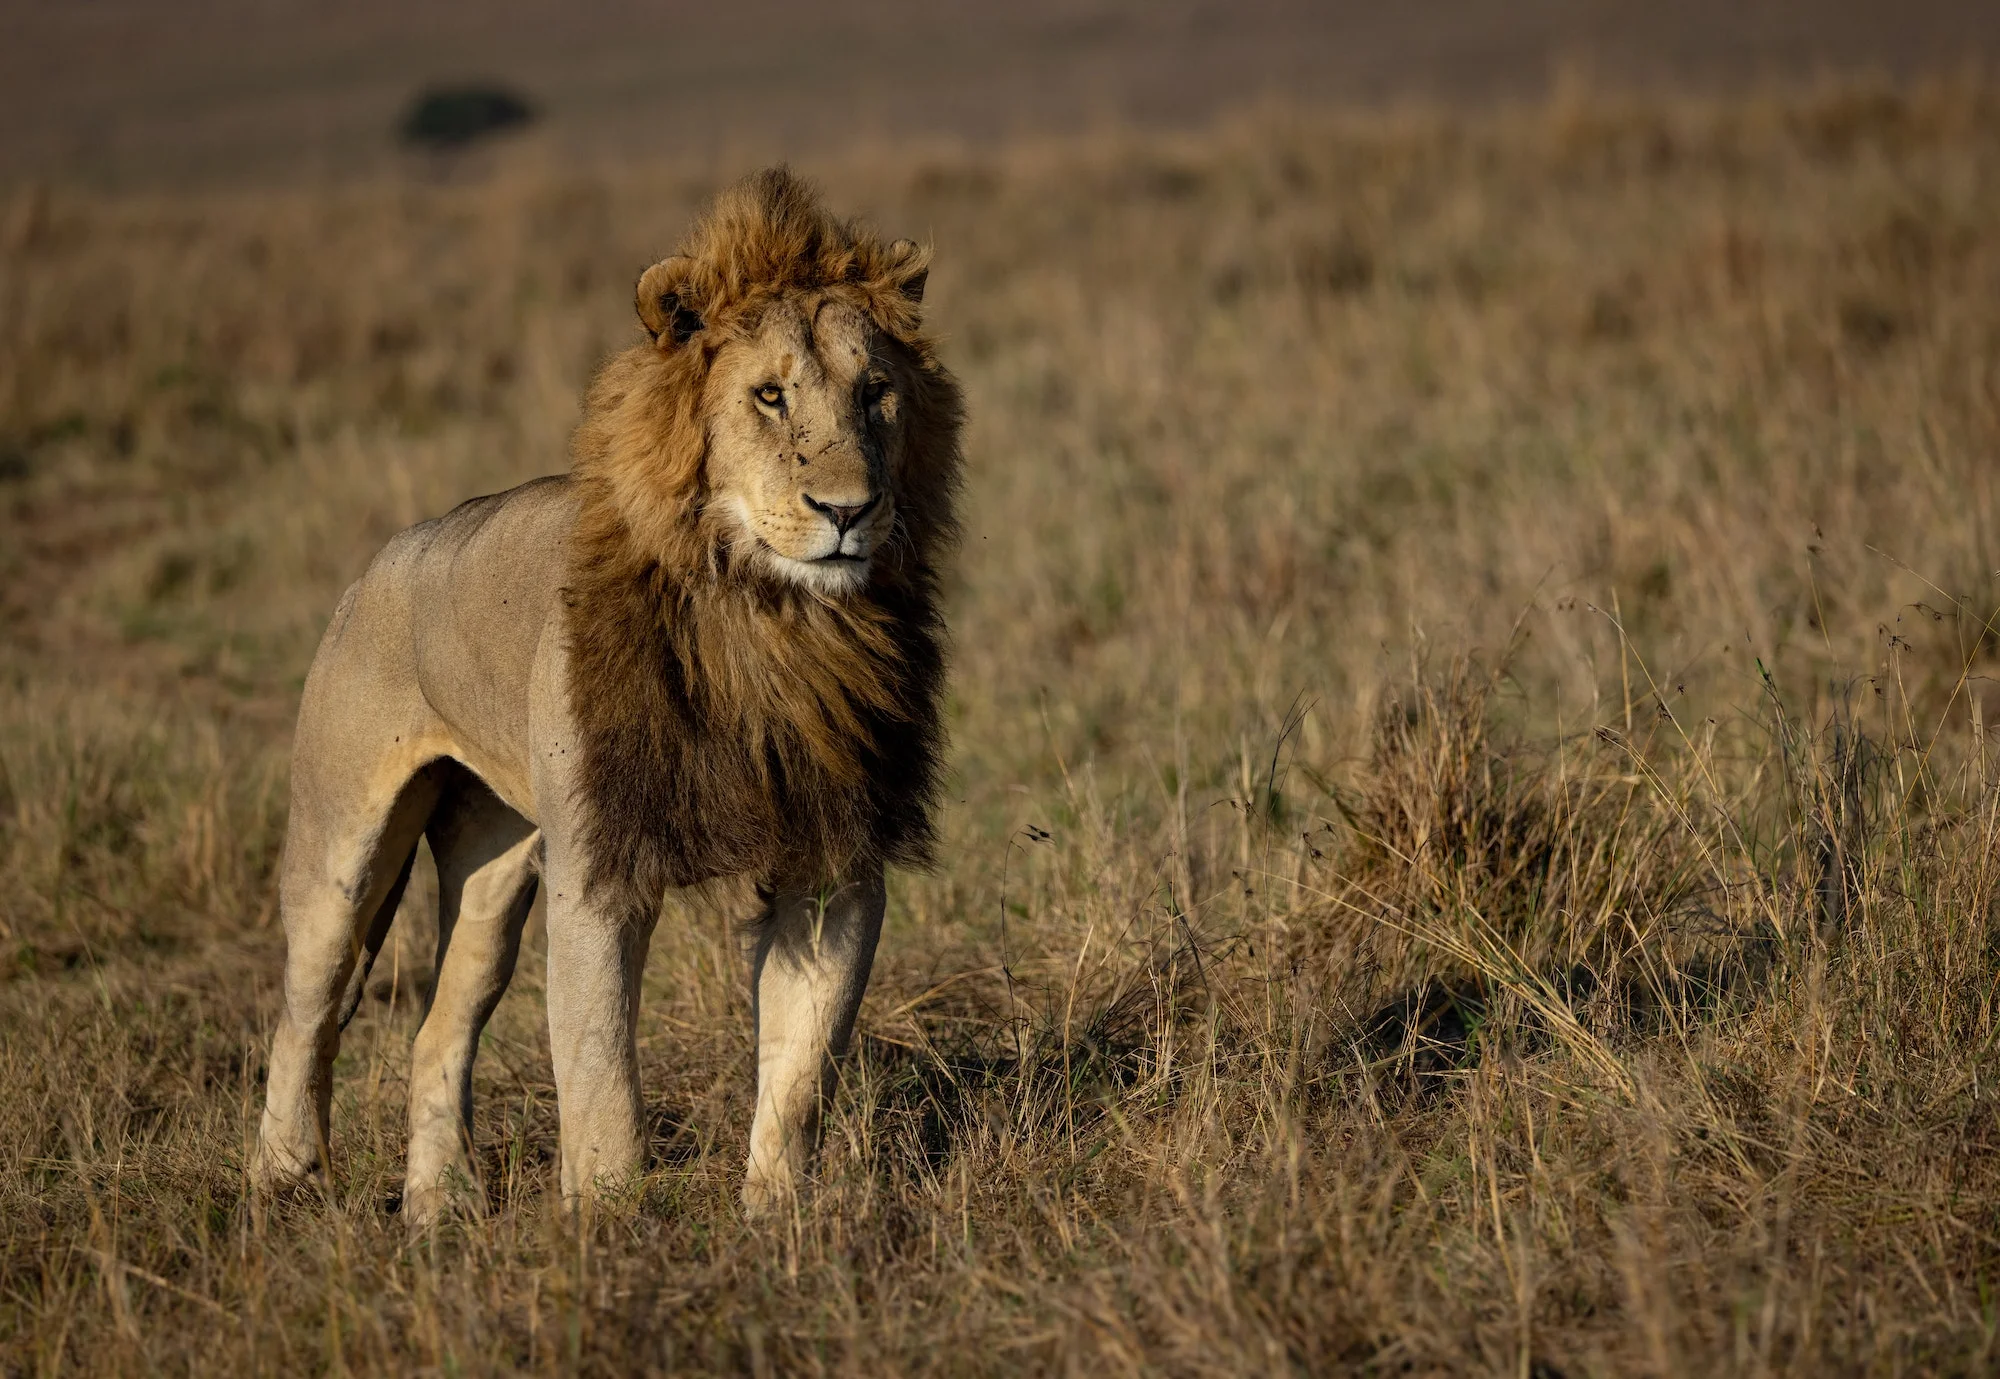 A Lion in Africa